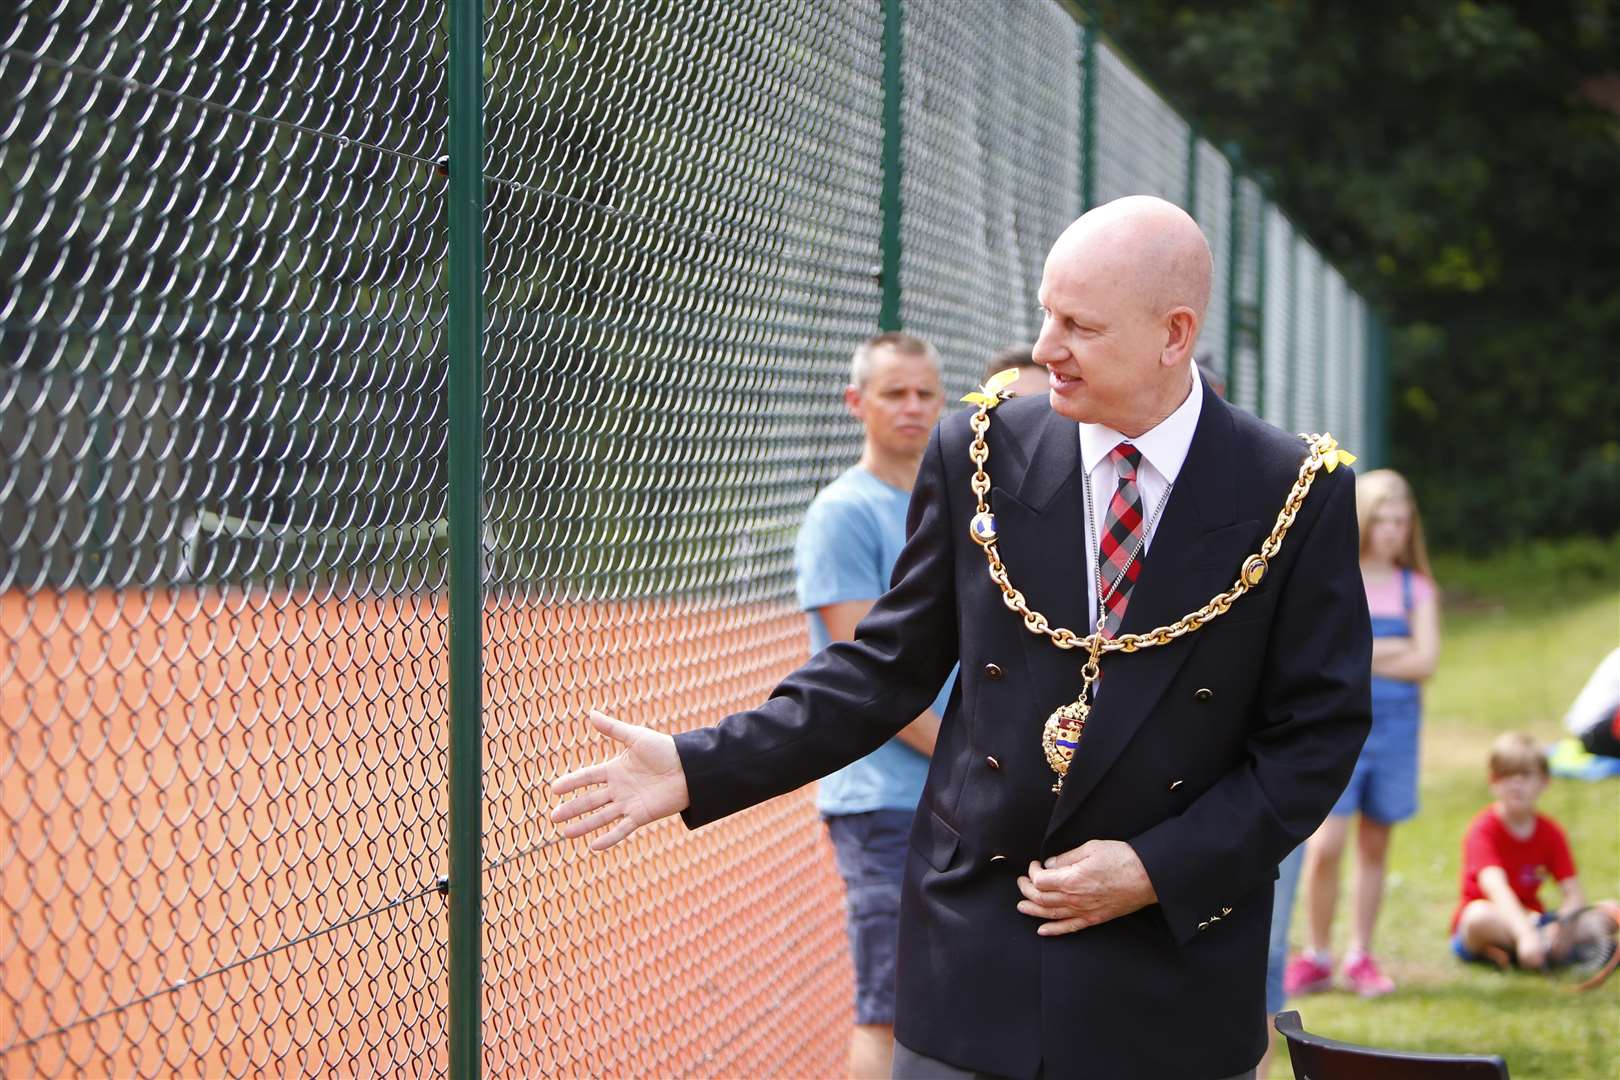 Mayor of Maidstone Cllr David Naghi at the opening of a new lay court at Maidstone Tennis Club